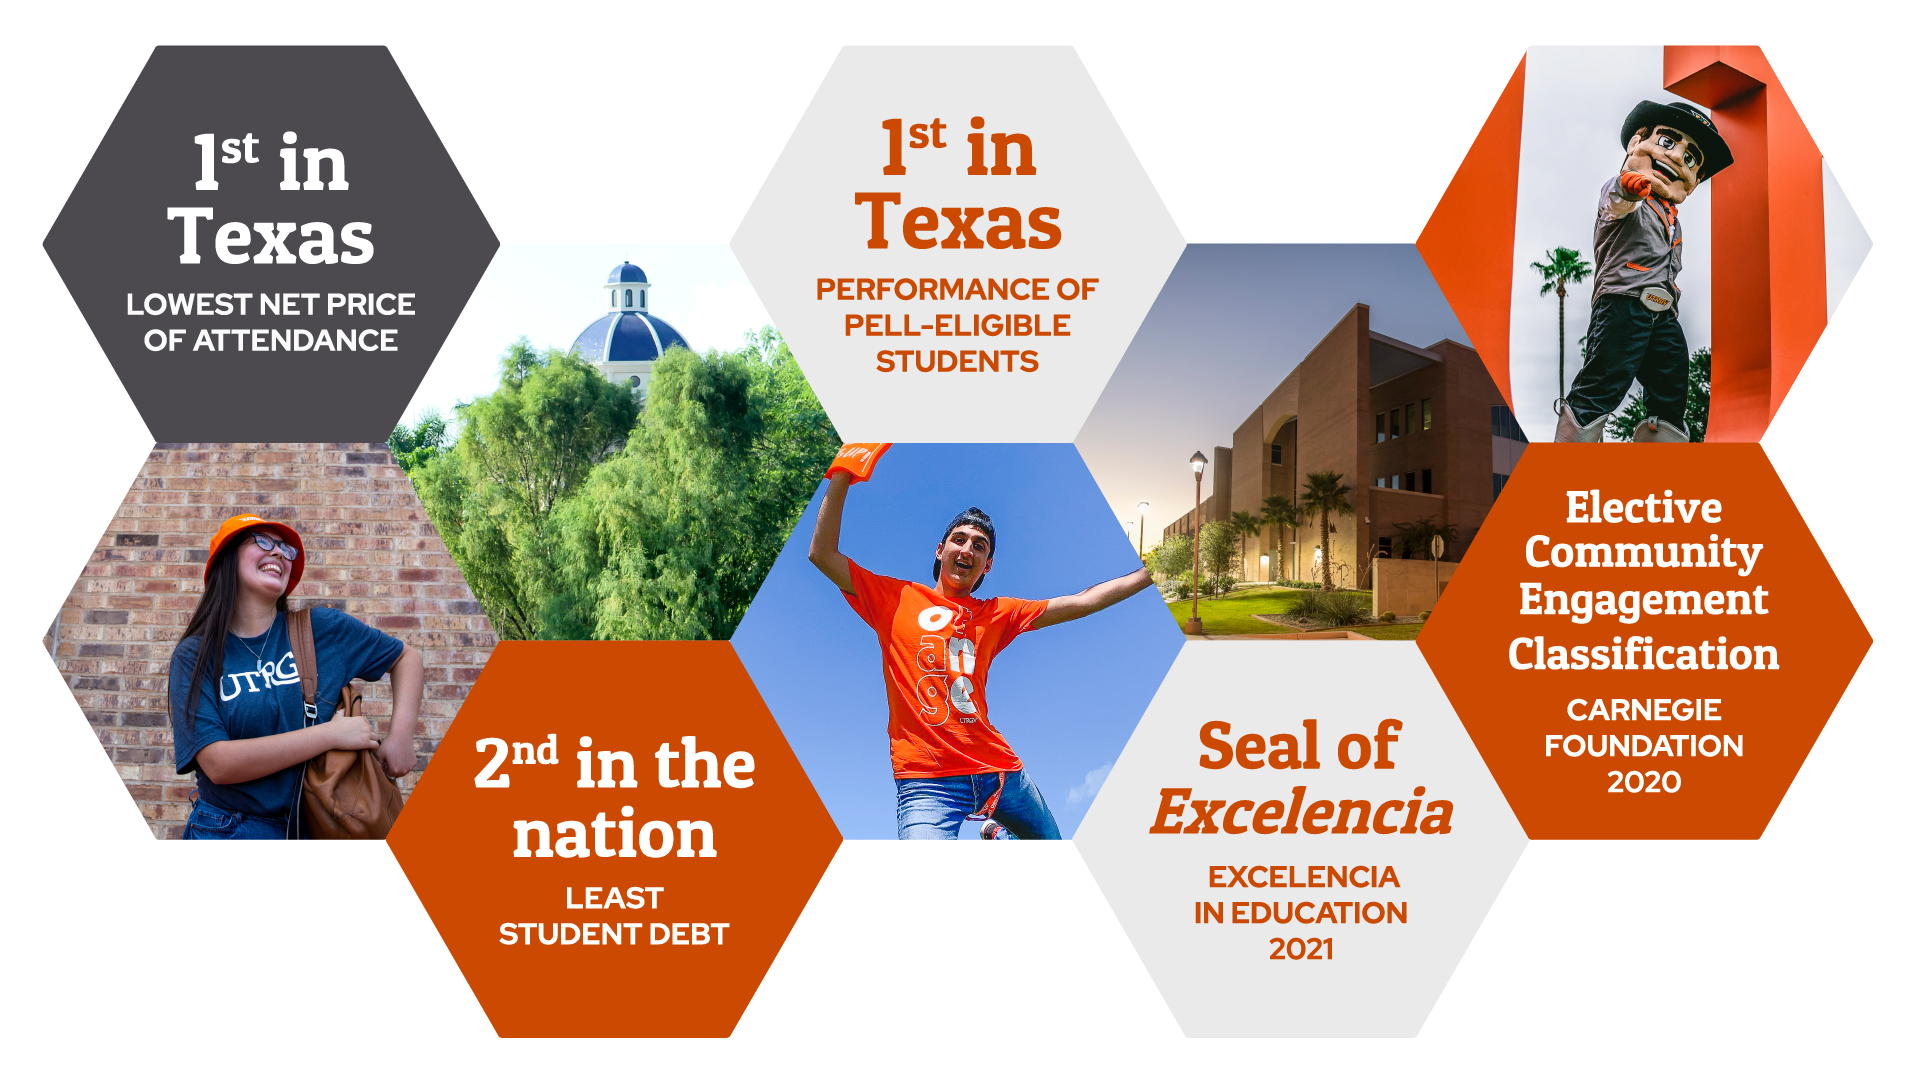 UTRGV Ranks - #1 in Texas for Least Student Debt,U.S. News & World Report (2021), #1 in Performance for First-Generation Students - Washington Monthly (2020), #2 in Texas and #36 Nationally for Social Mobility - U.S. News & World Report (2020), Degrees Awarded in FY 2020 - 5,942, Freshman Retention Rate (Fall 19 cohort) - 80.7%,Ranked #193 out of 744 schools for value - Money Magazine (2019